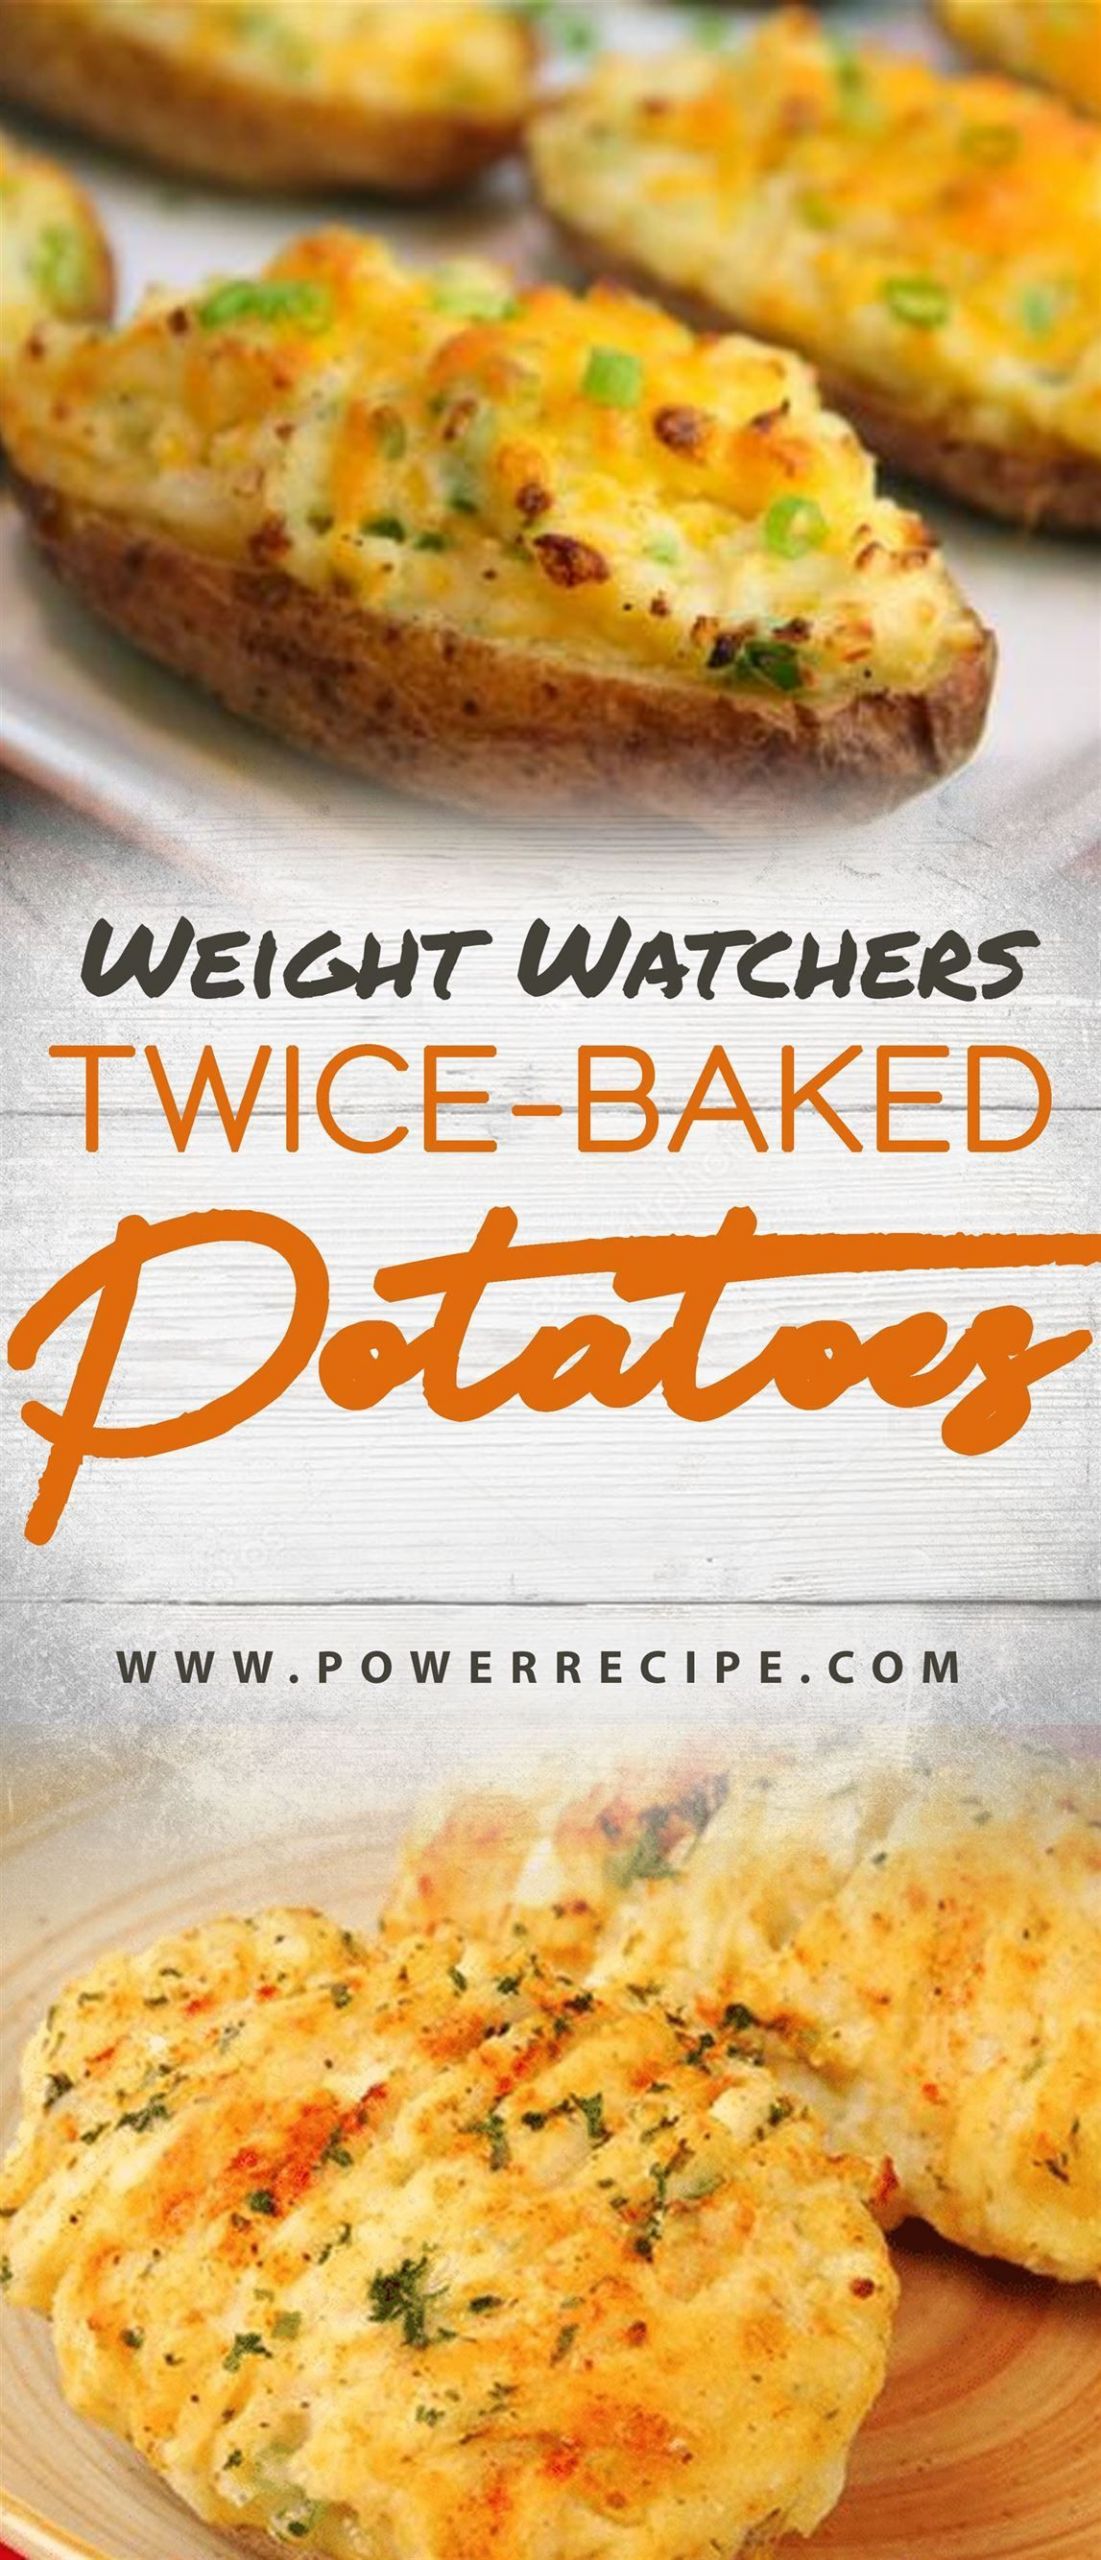 Weight Watcher Roasted Potatoes
 Pin on W W Diet